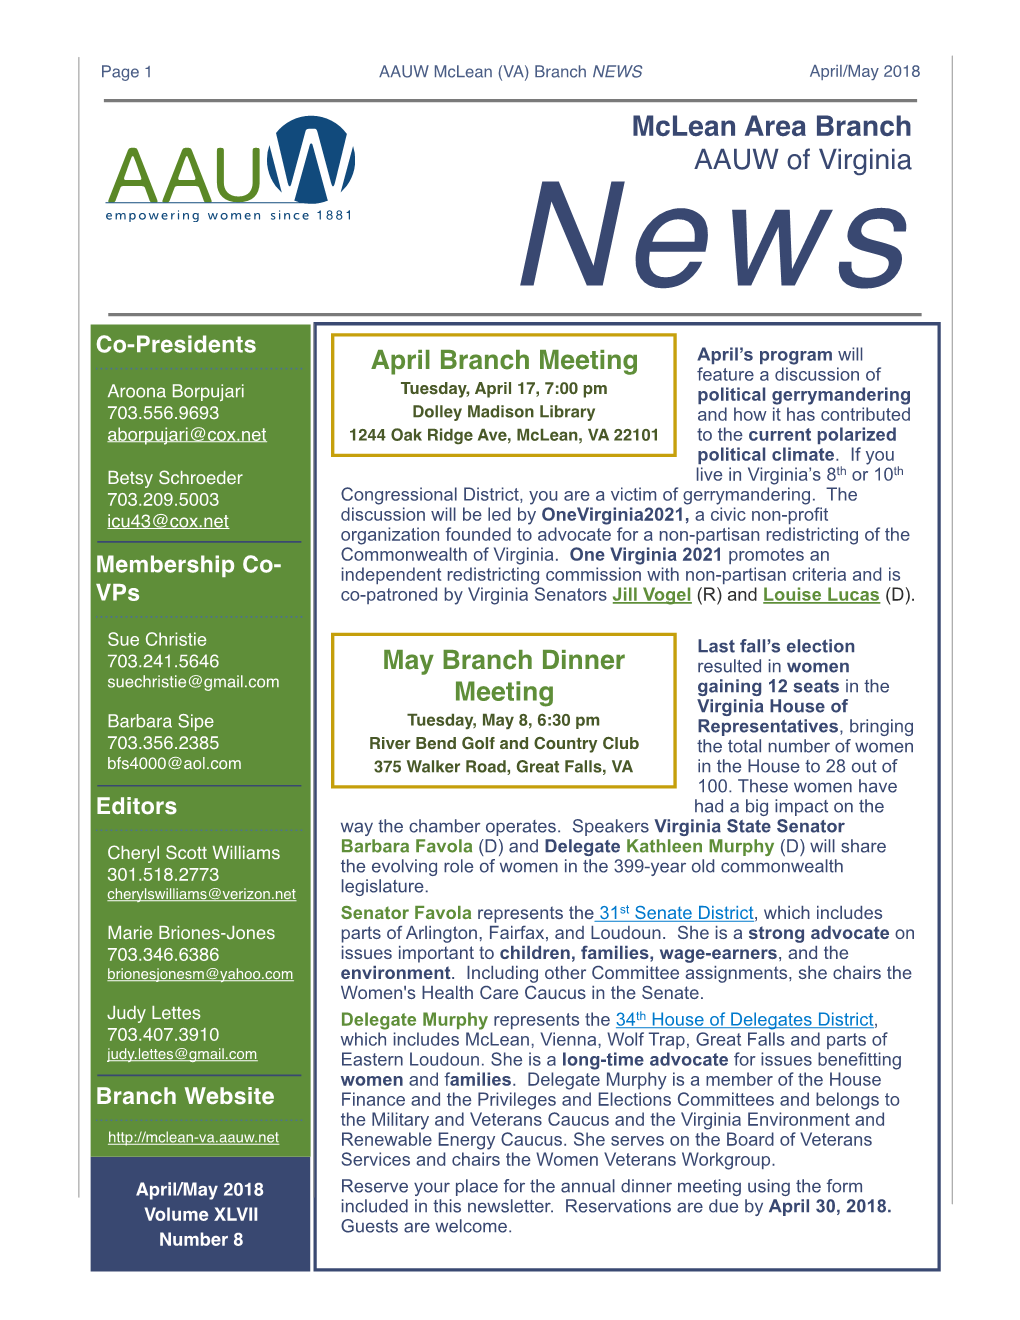 AAUW News Template 2018 04 and 05